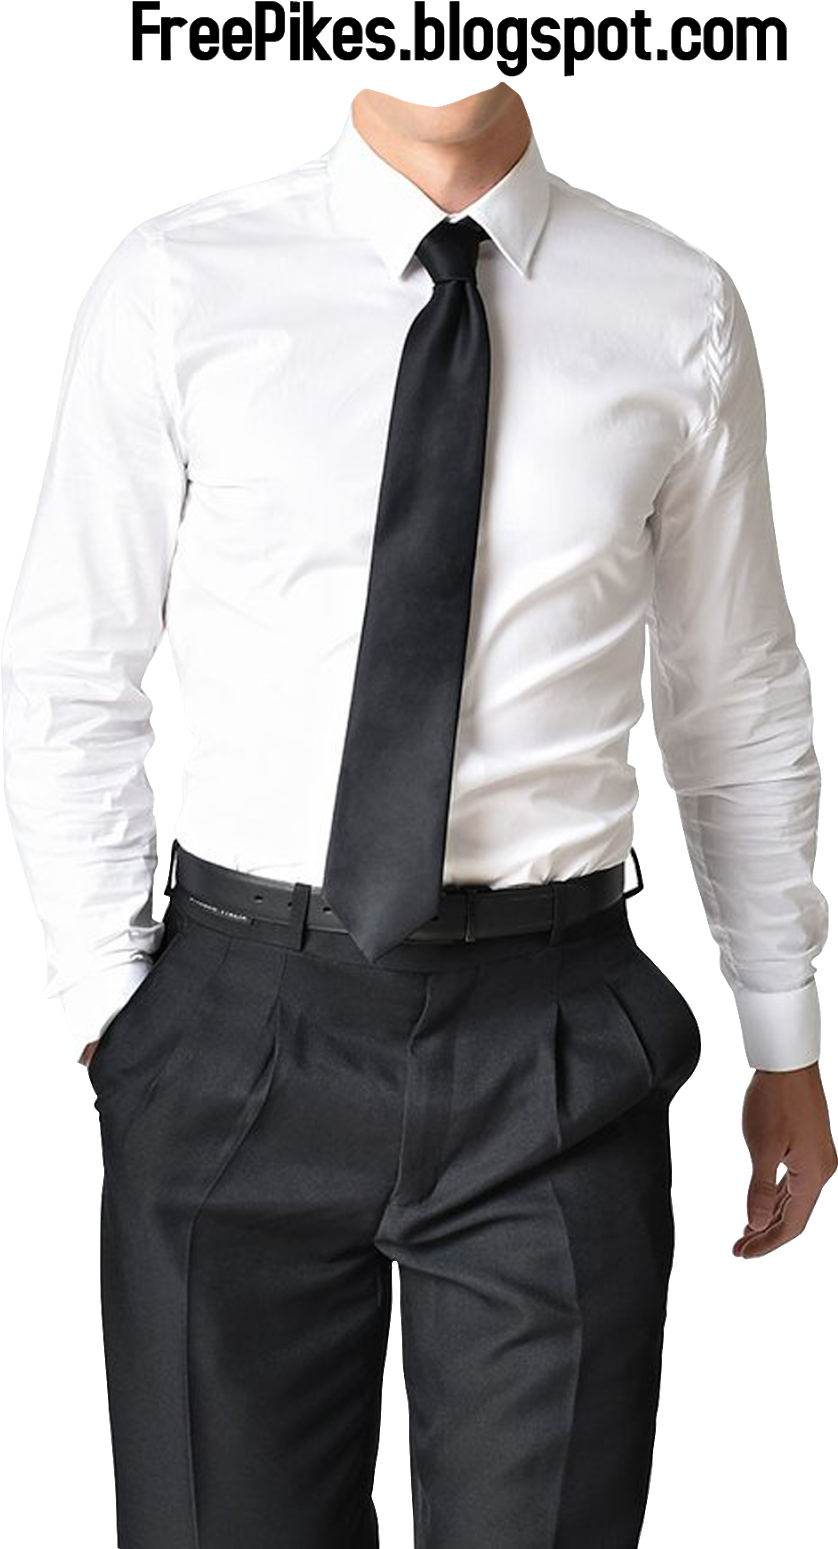 Professional White Dress Shirtand Tie PNG